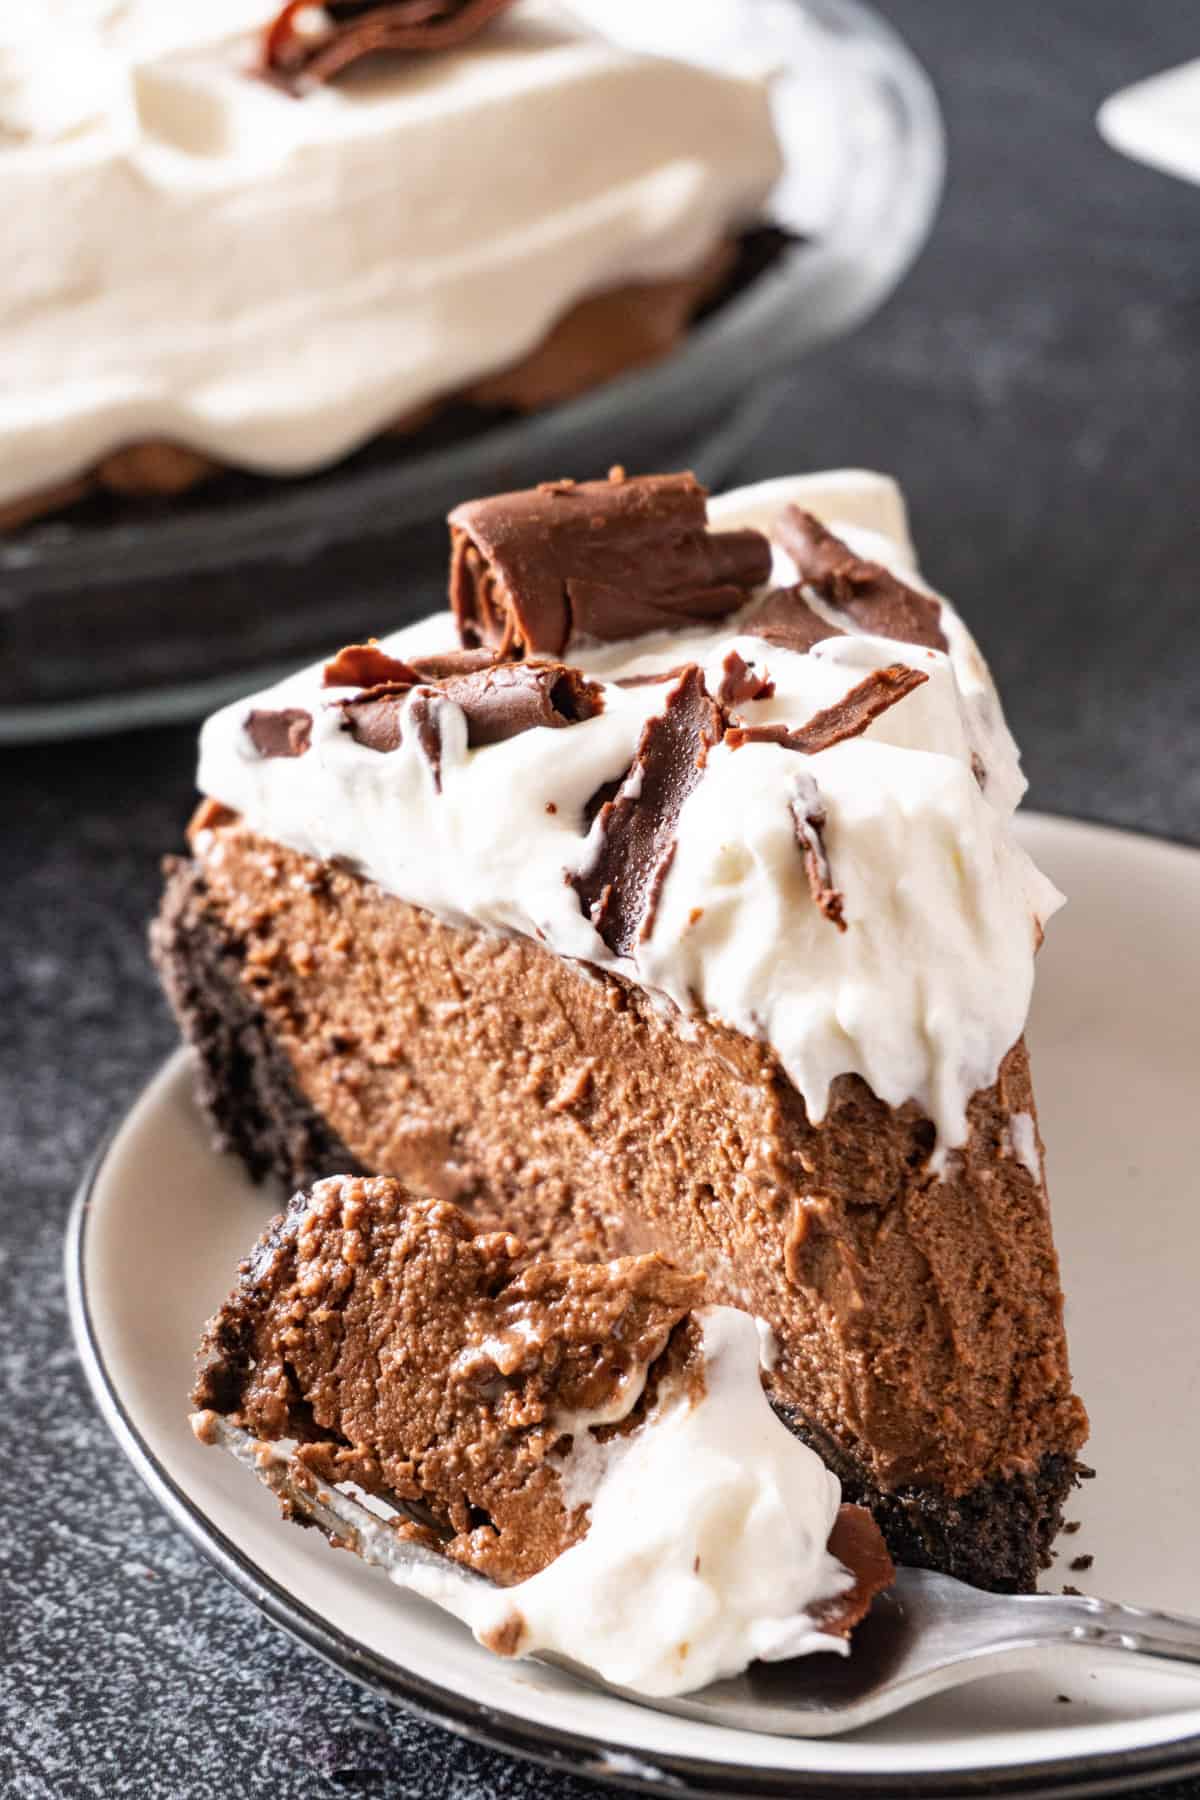 French Silk Chocolate Pie with a bite taken out of it